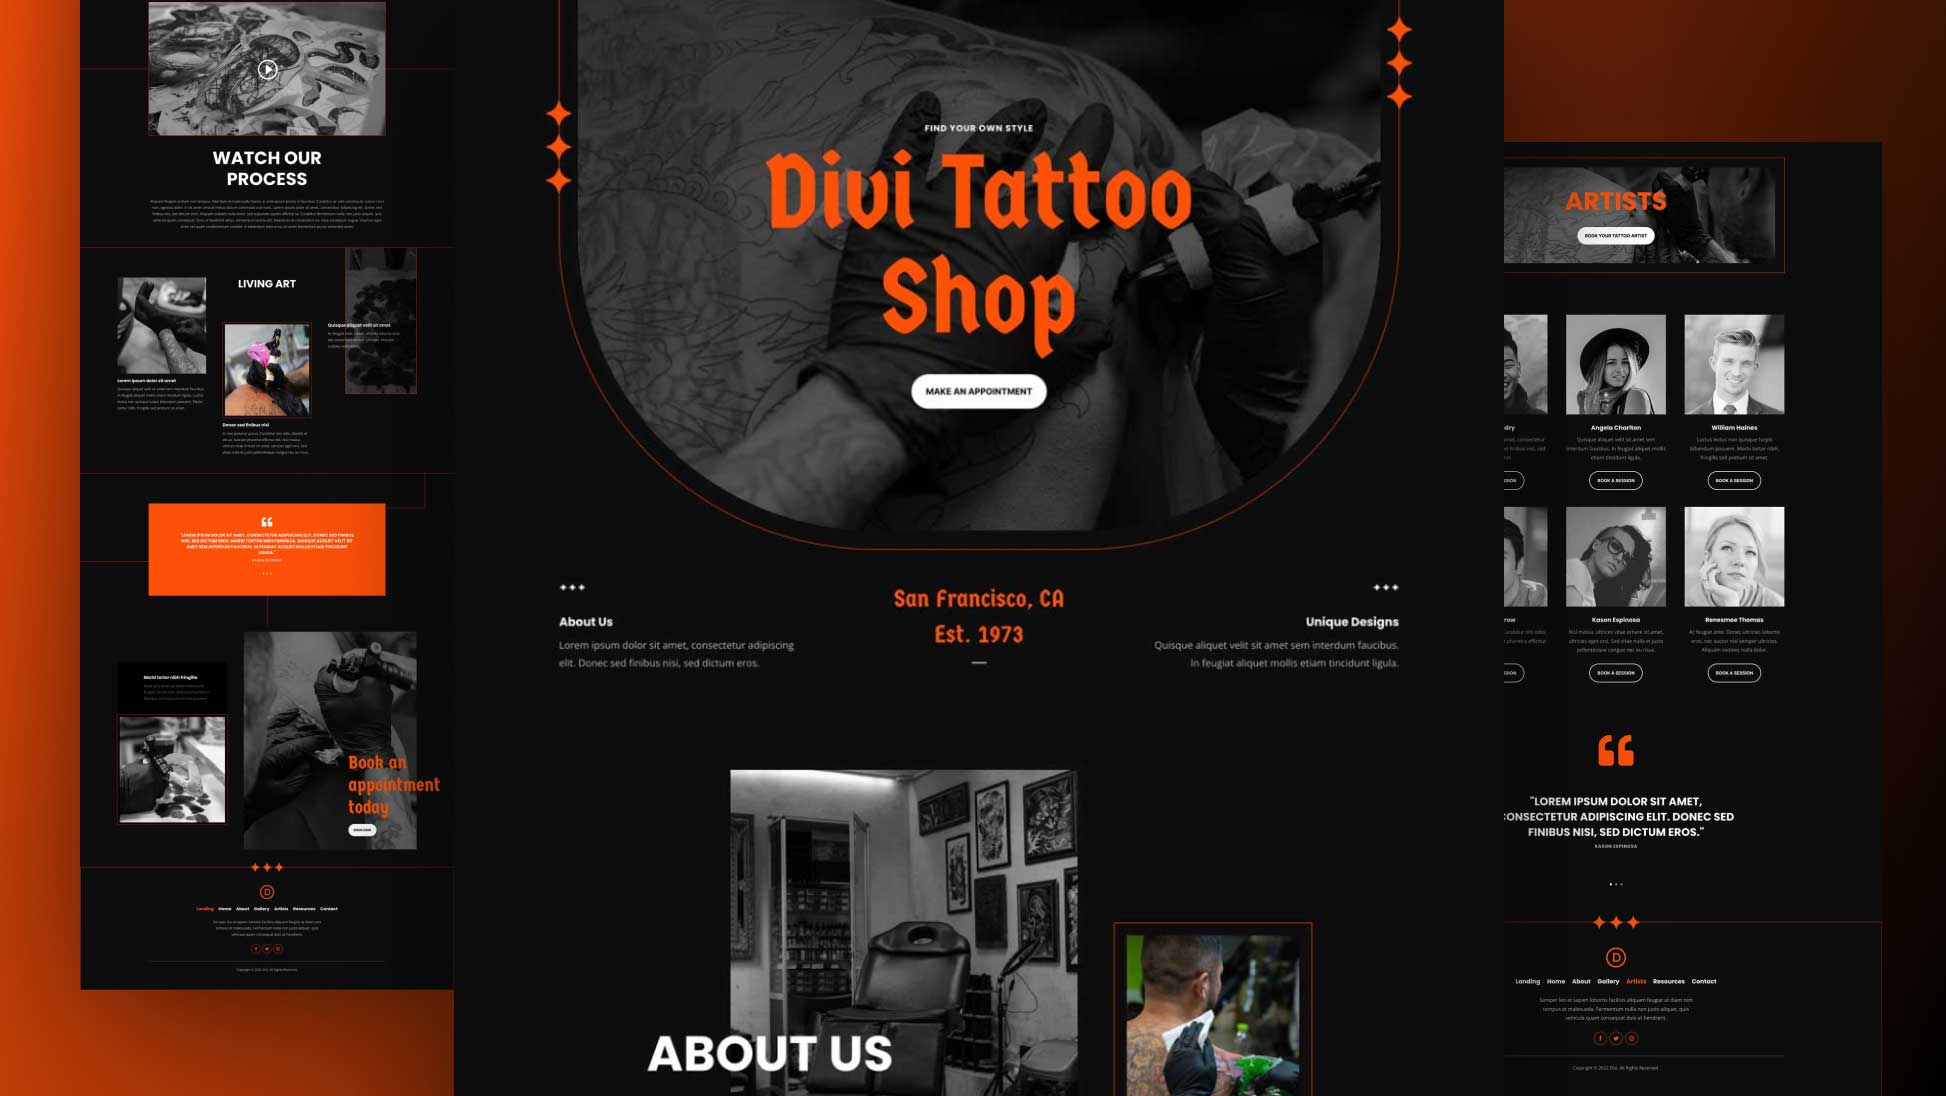 Appointment Scheduling Software for Tattoo Artists: 8 Key Benefits